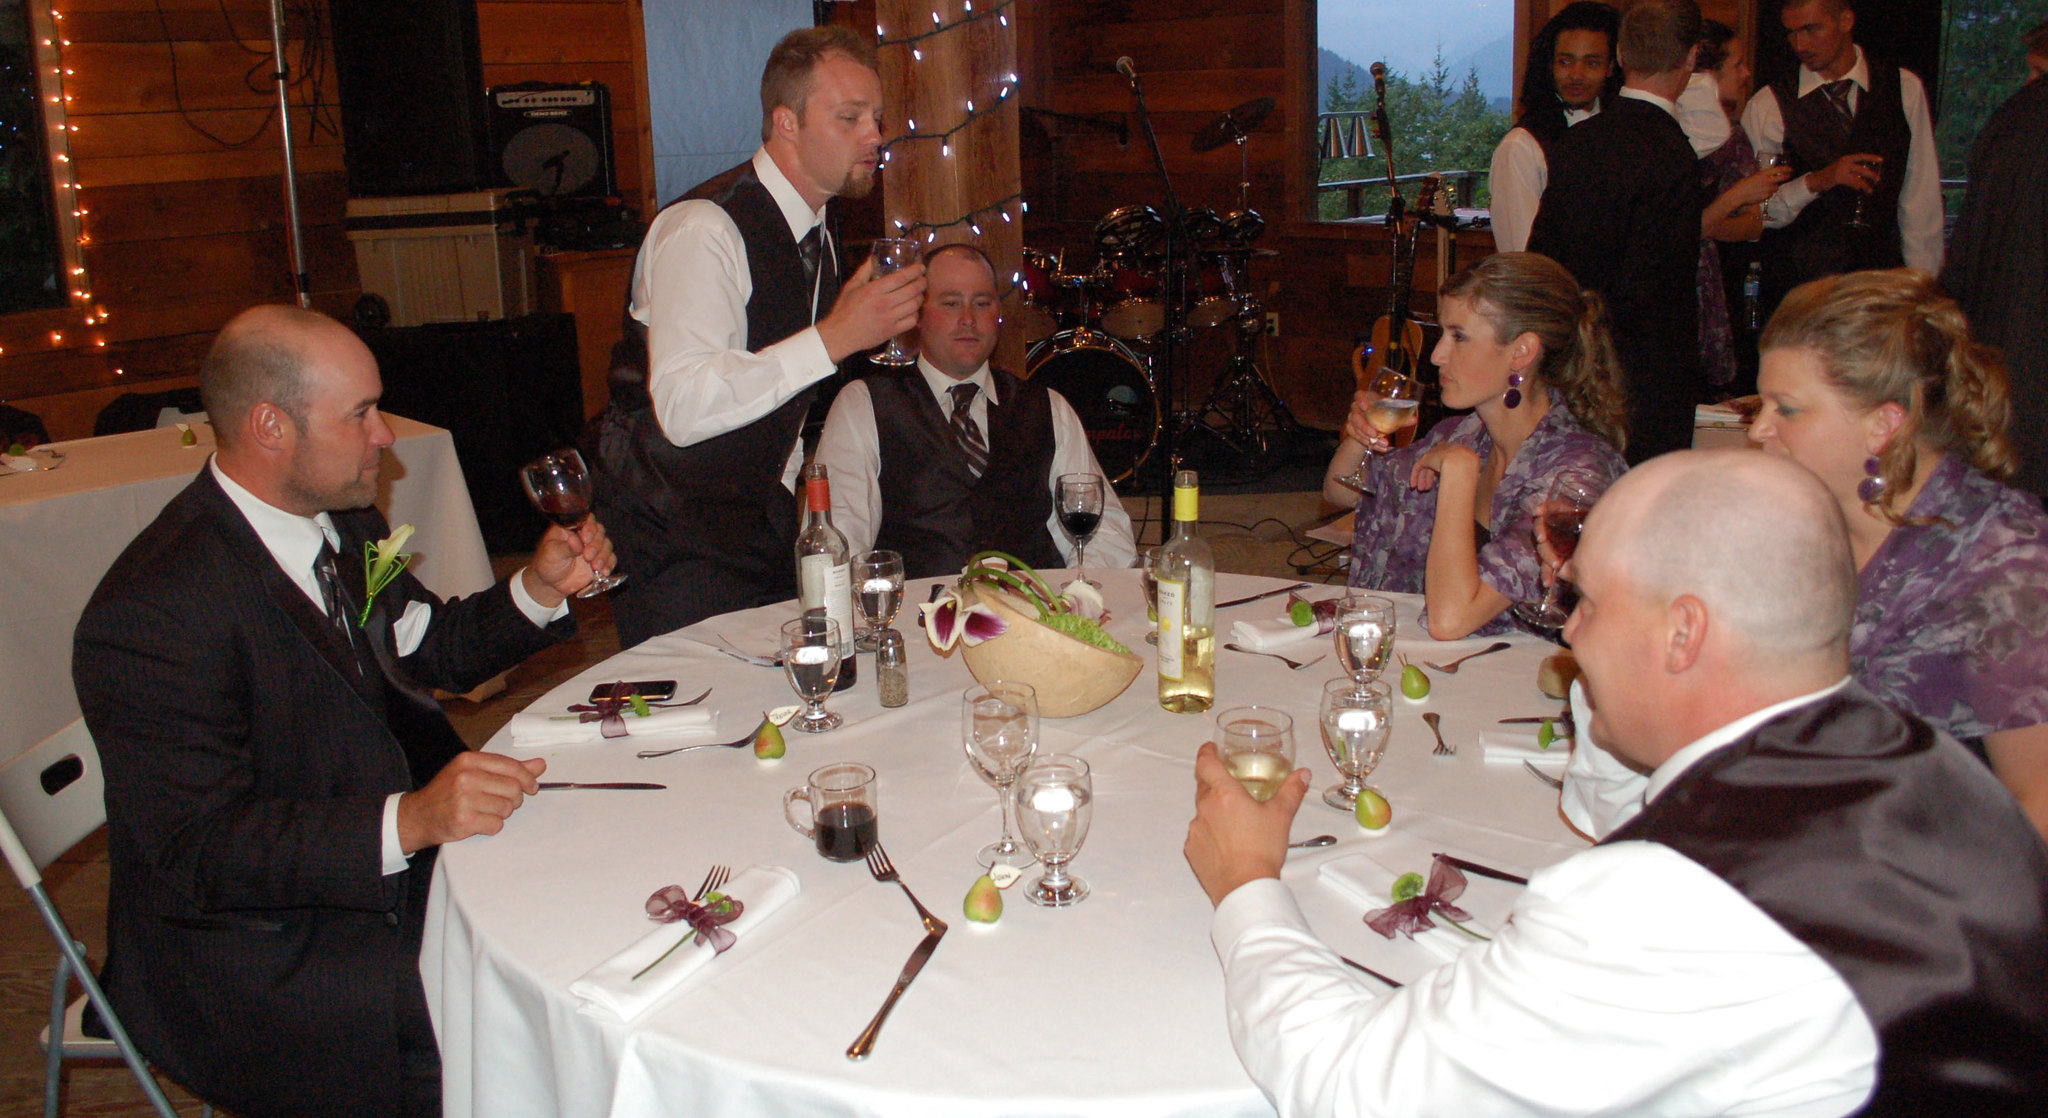 A man raising his glass at a table where other wedding guests are seated | Source: Flickr